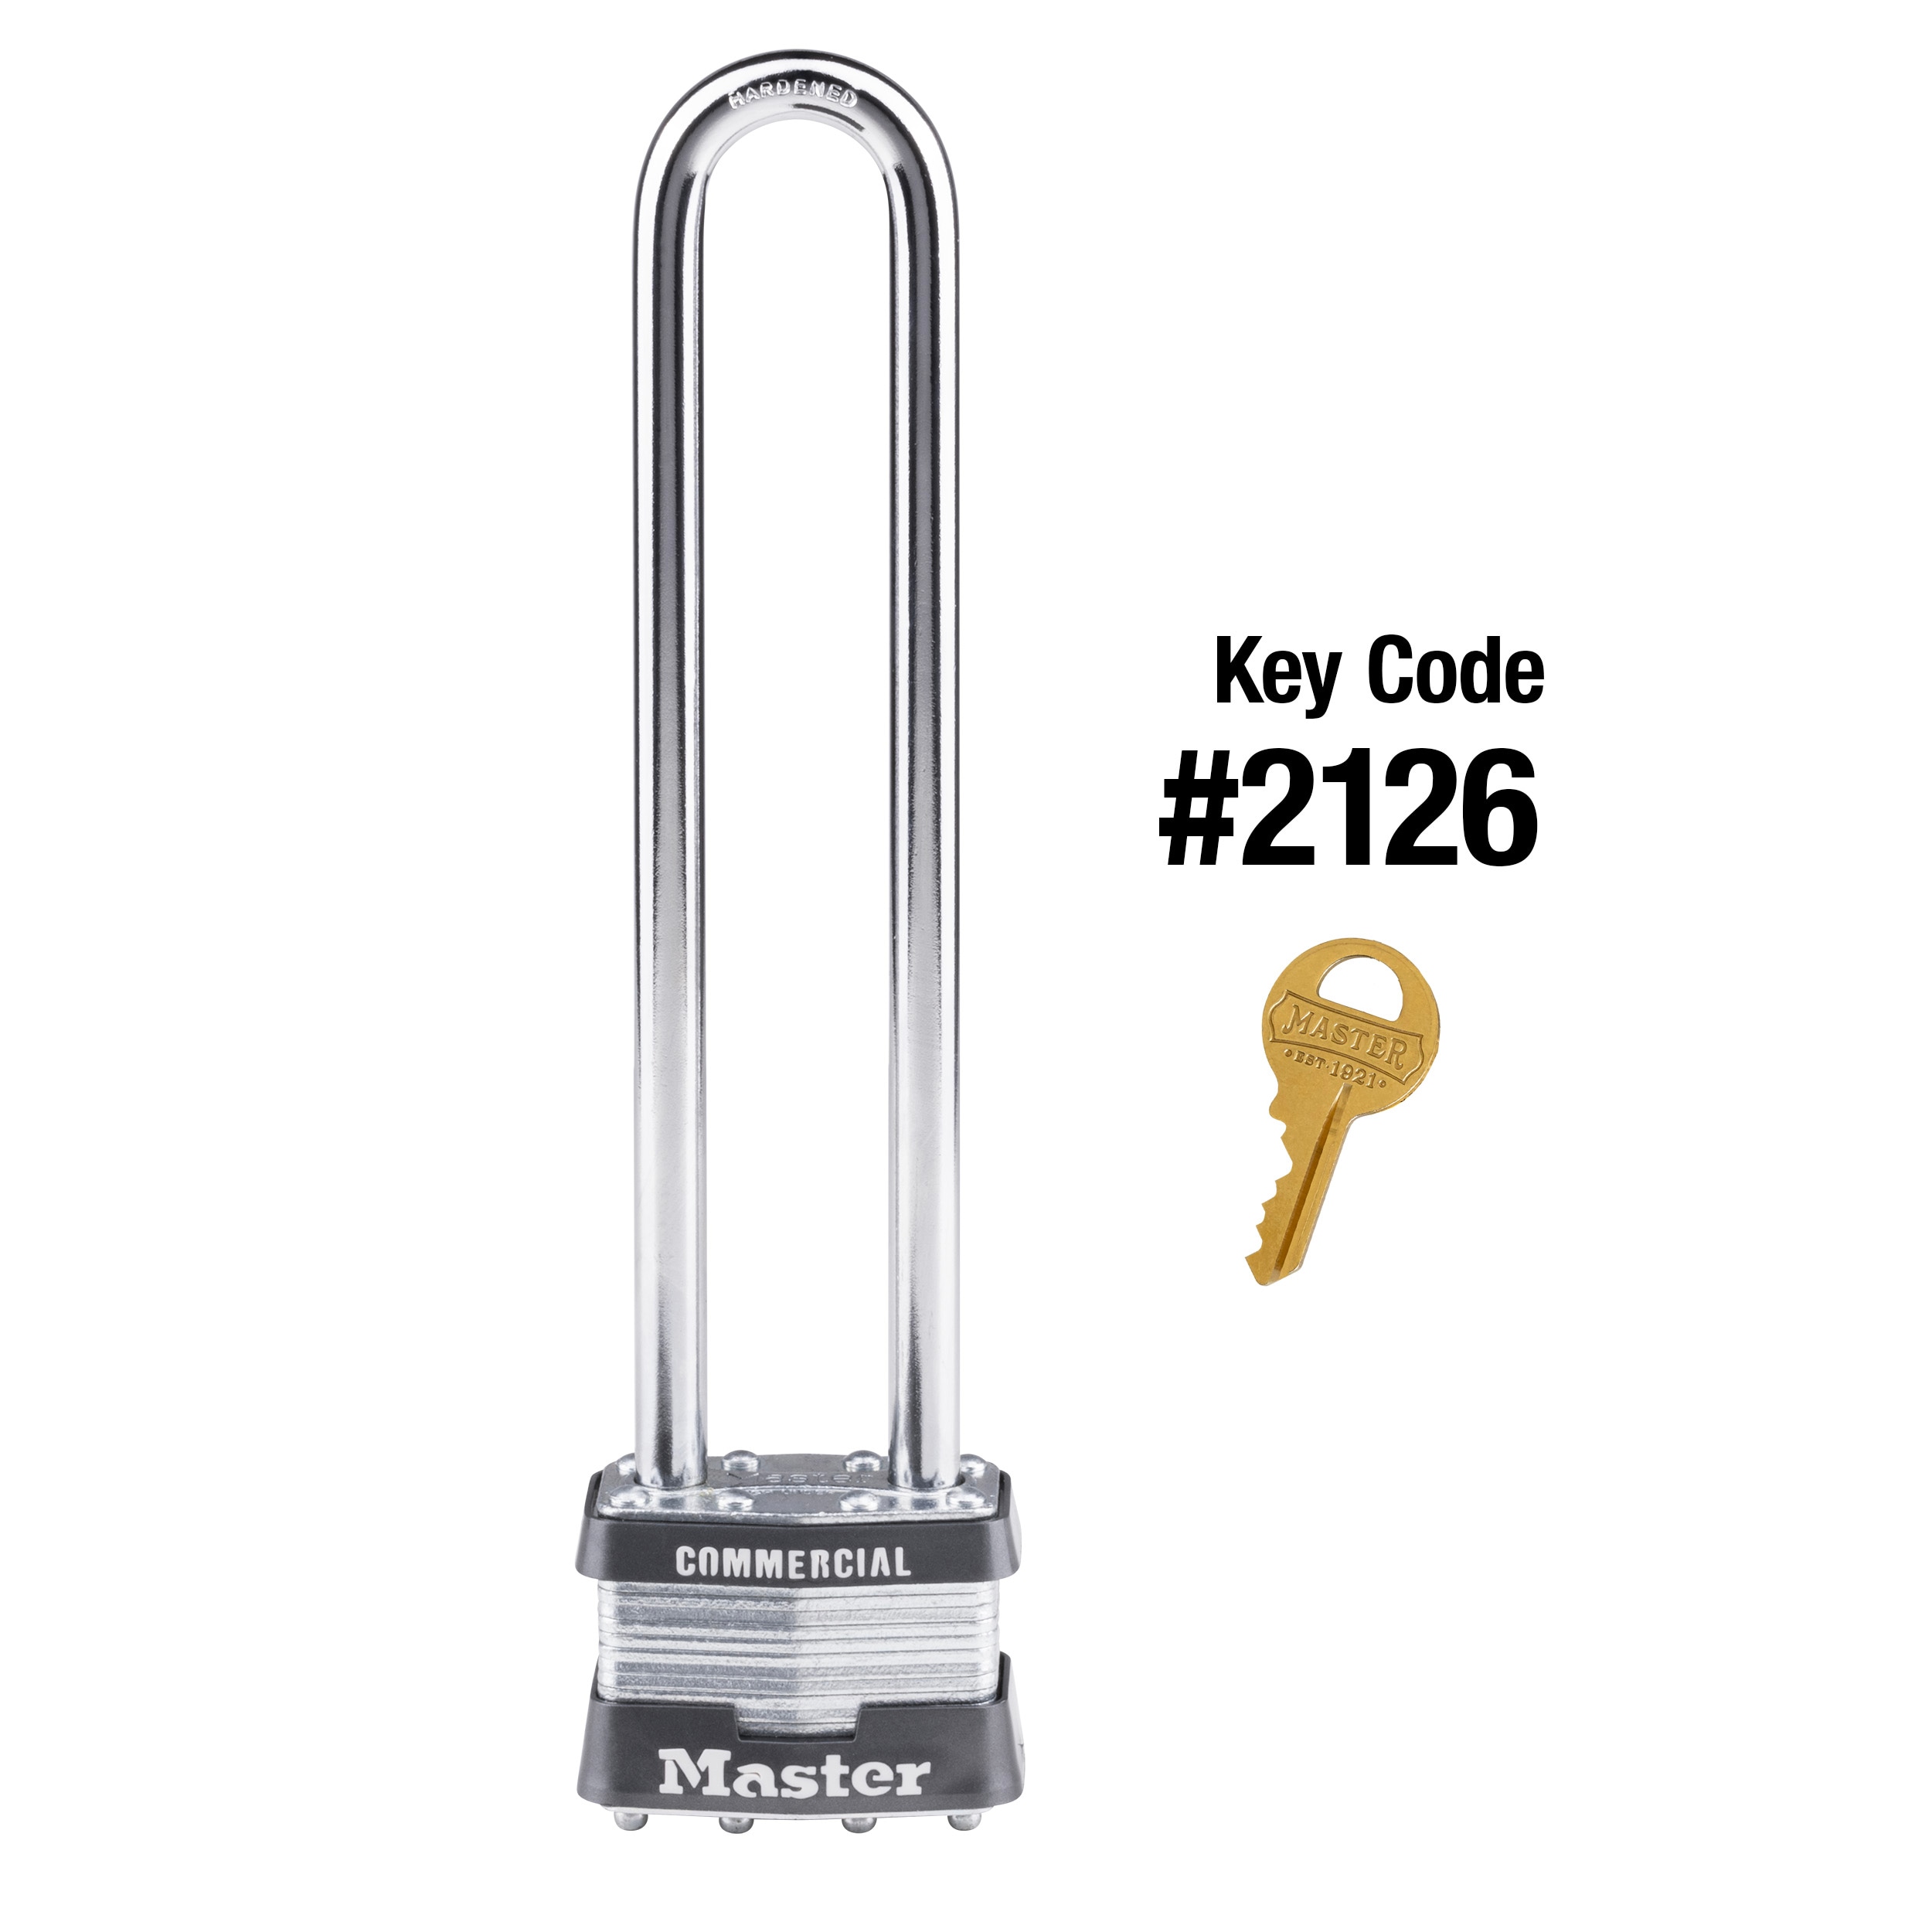 Master Lock Lock with Key, 1-9/16 in. Wide, 1-1/2 in. Shackle 141DLFHC -  The Home Depot